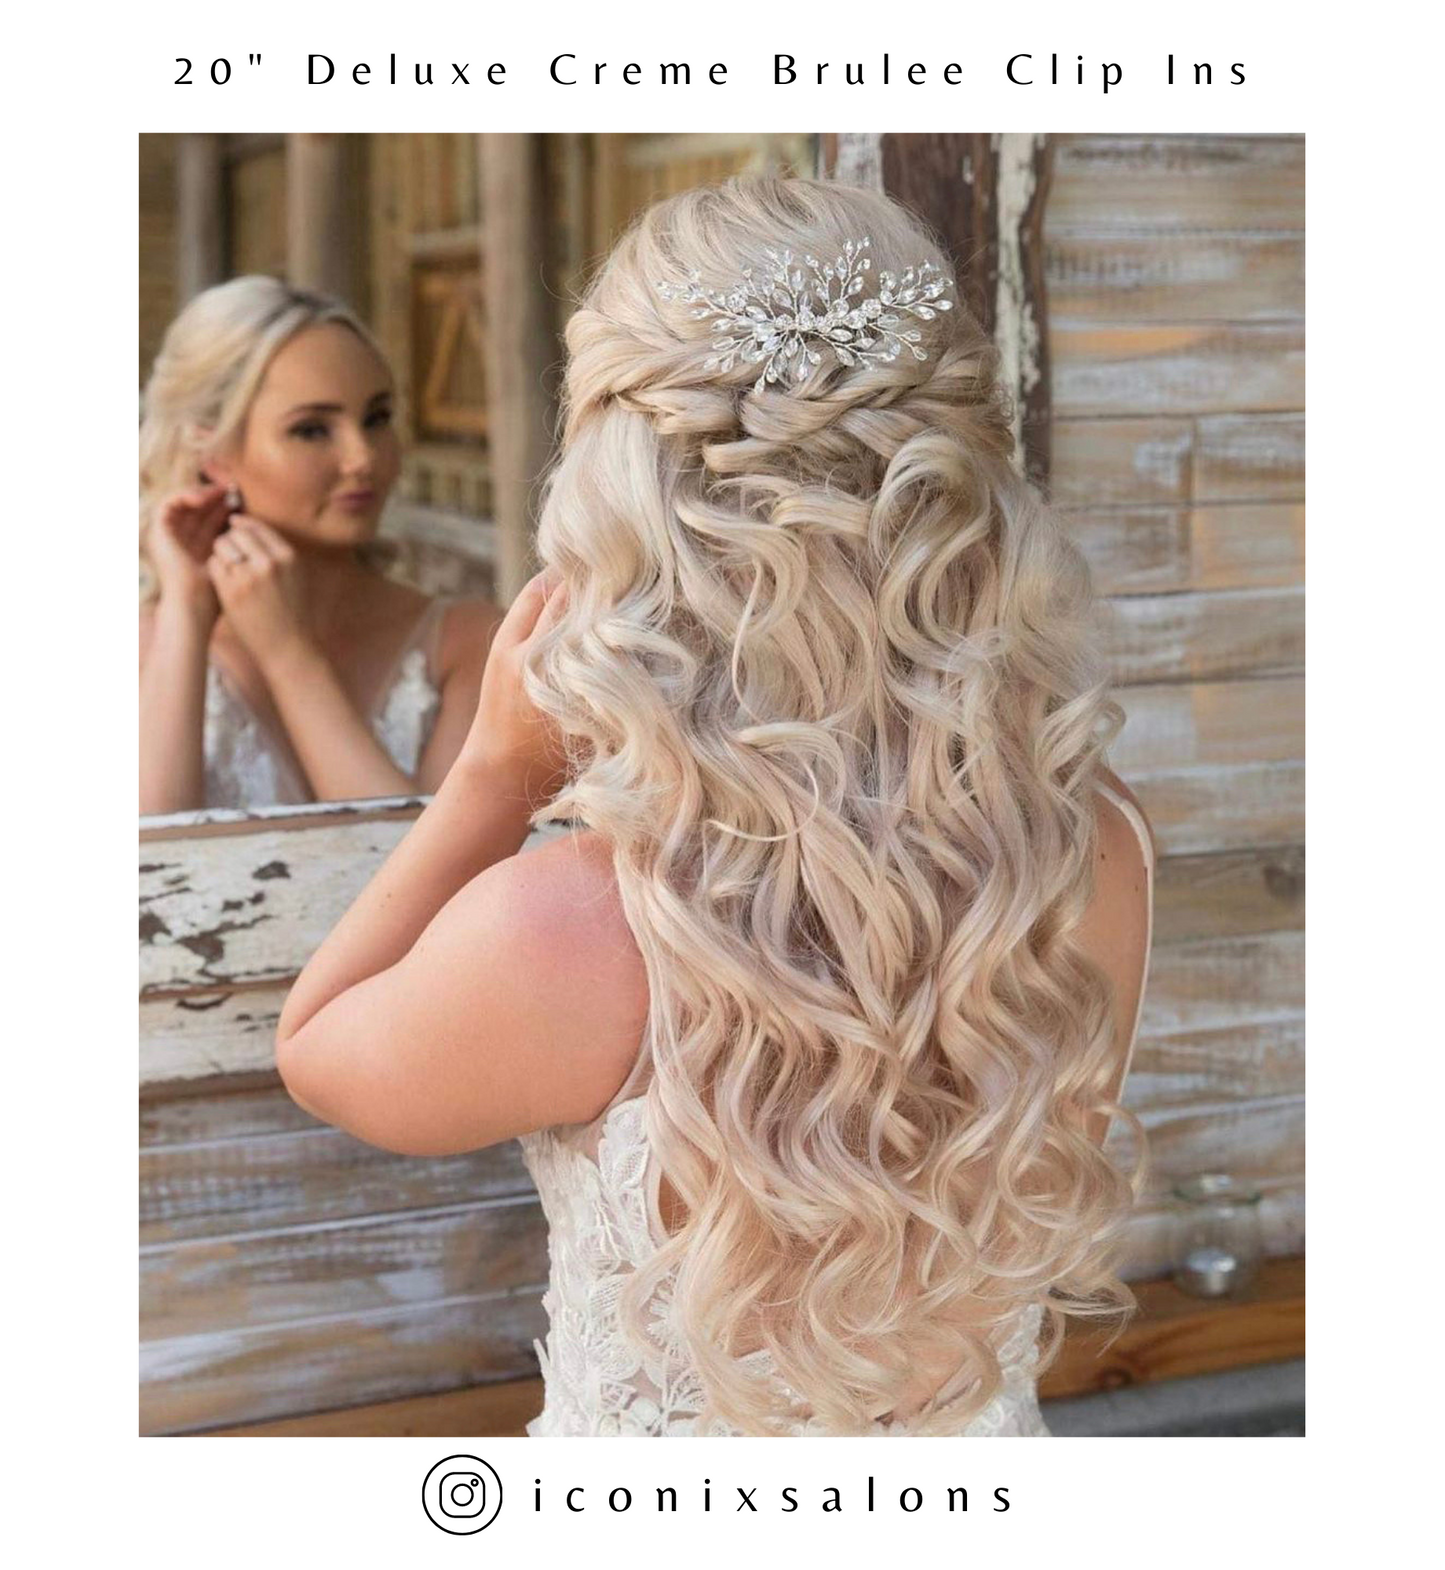 Creme Brulee Blonde #22 Halo Hair Extensions 20-inch